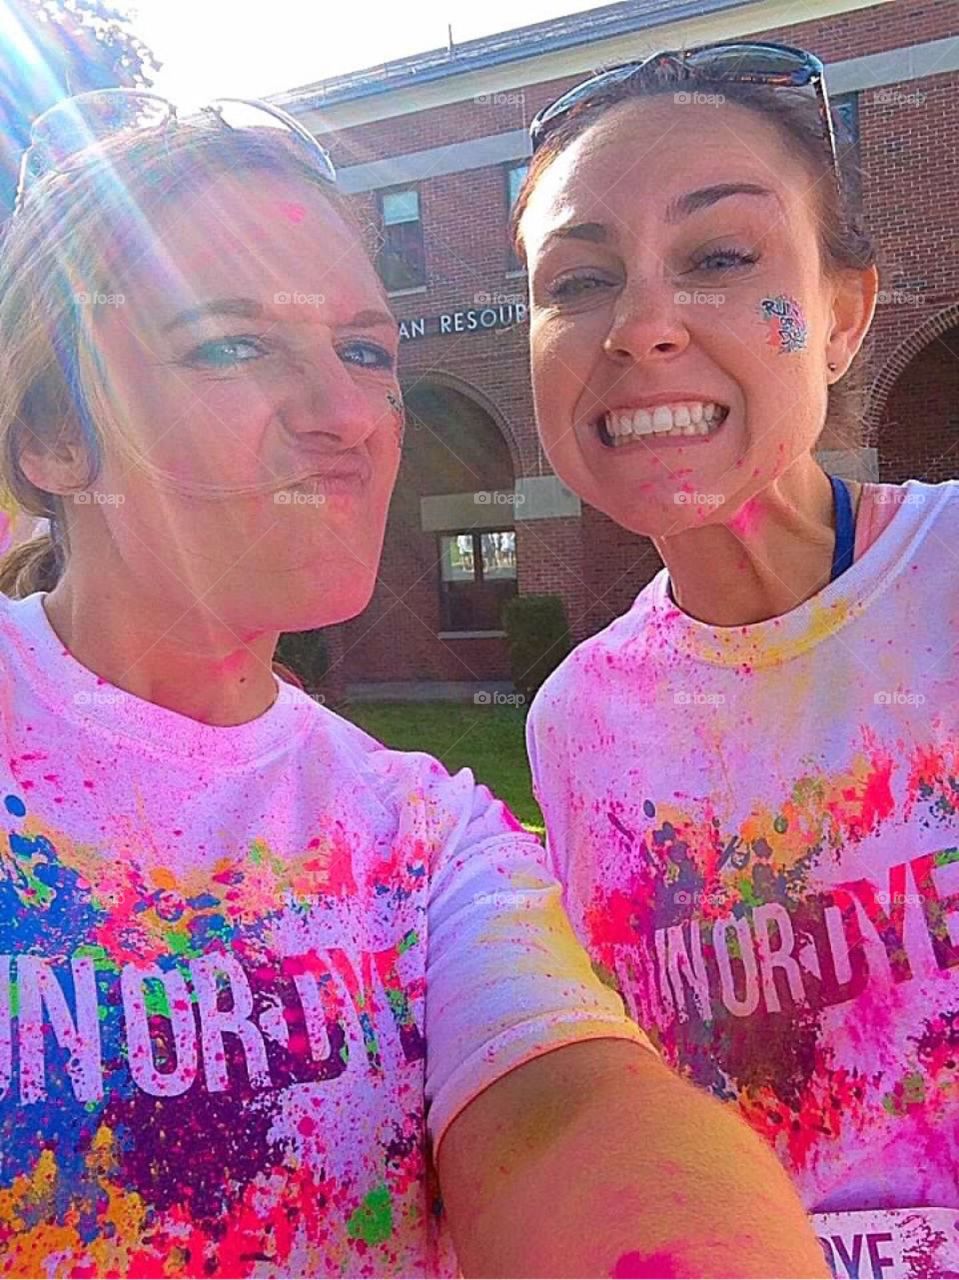 We conquered the color run!